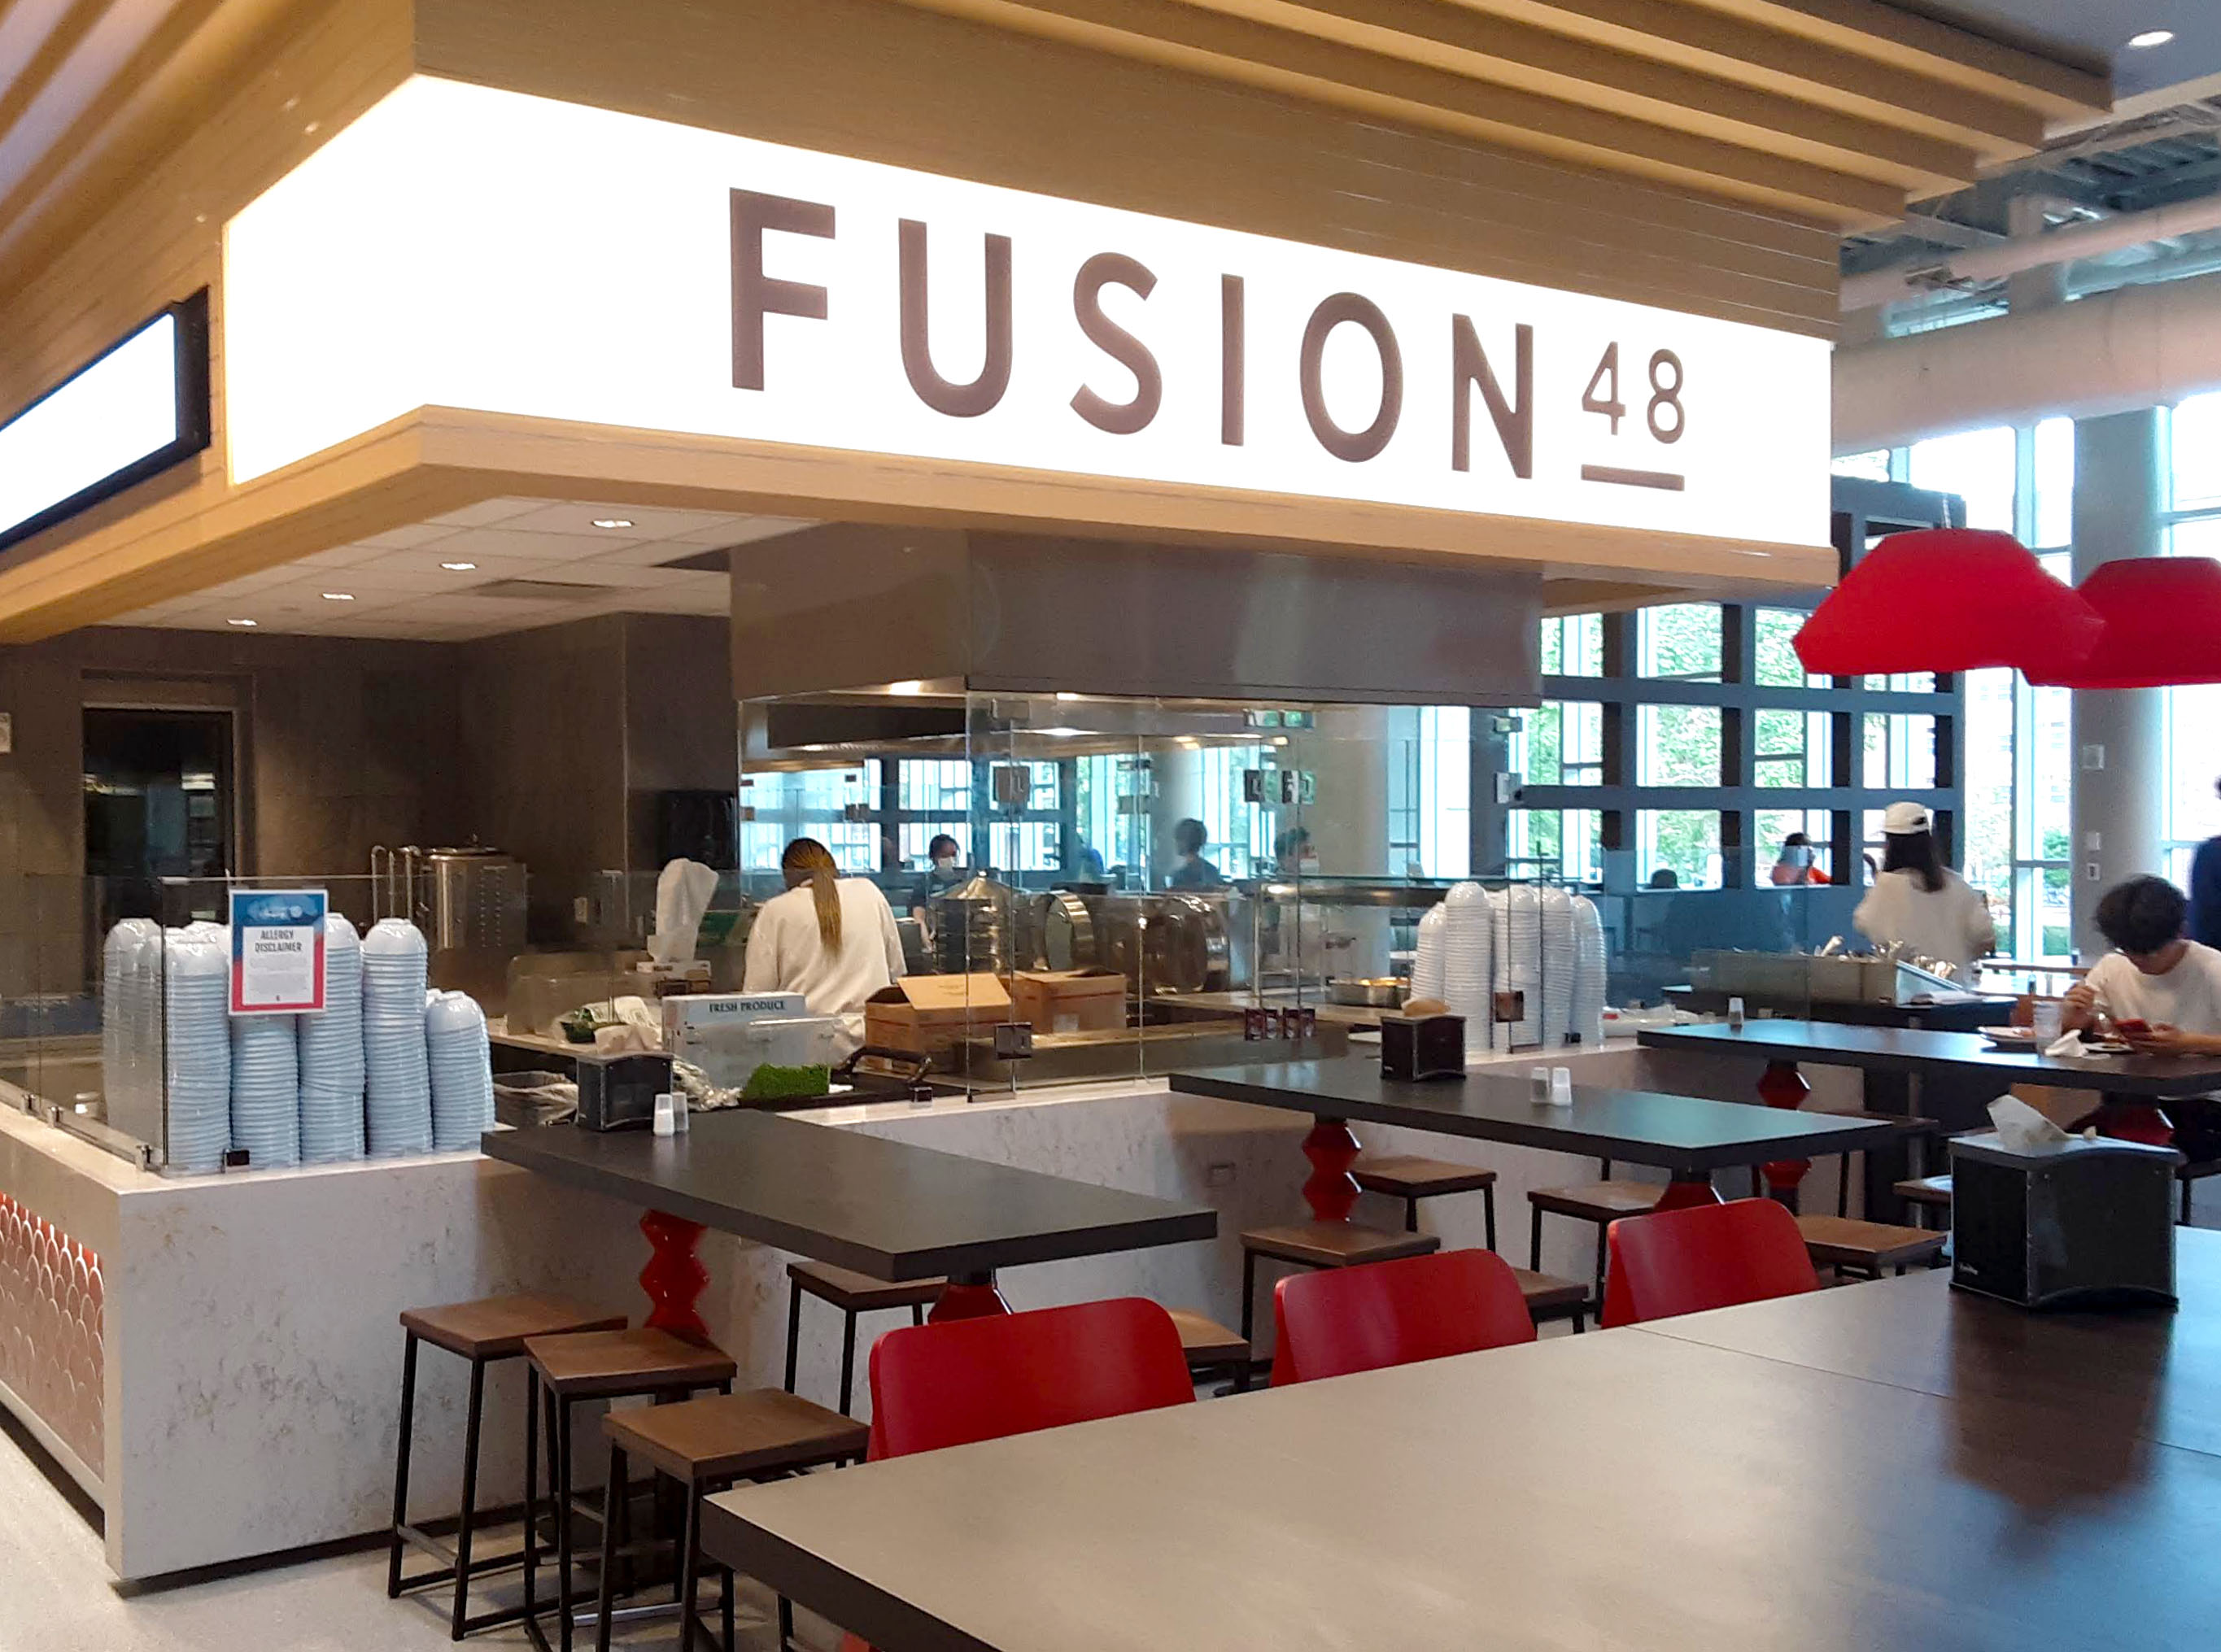 Inside the ISR Dining Hall, there is a restaurant called FUSION 48, and there is a sign with the name above a self serve counter. Photo by Paul Young.